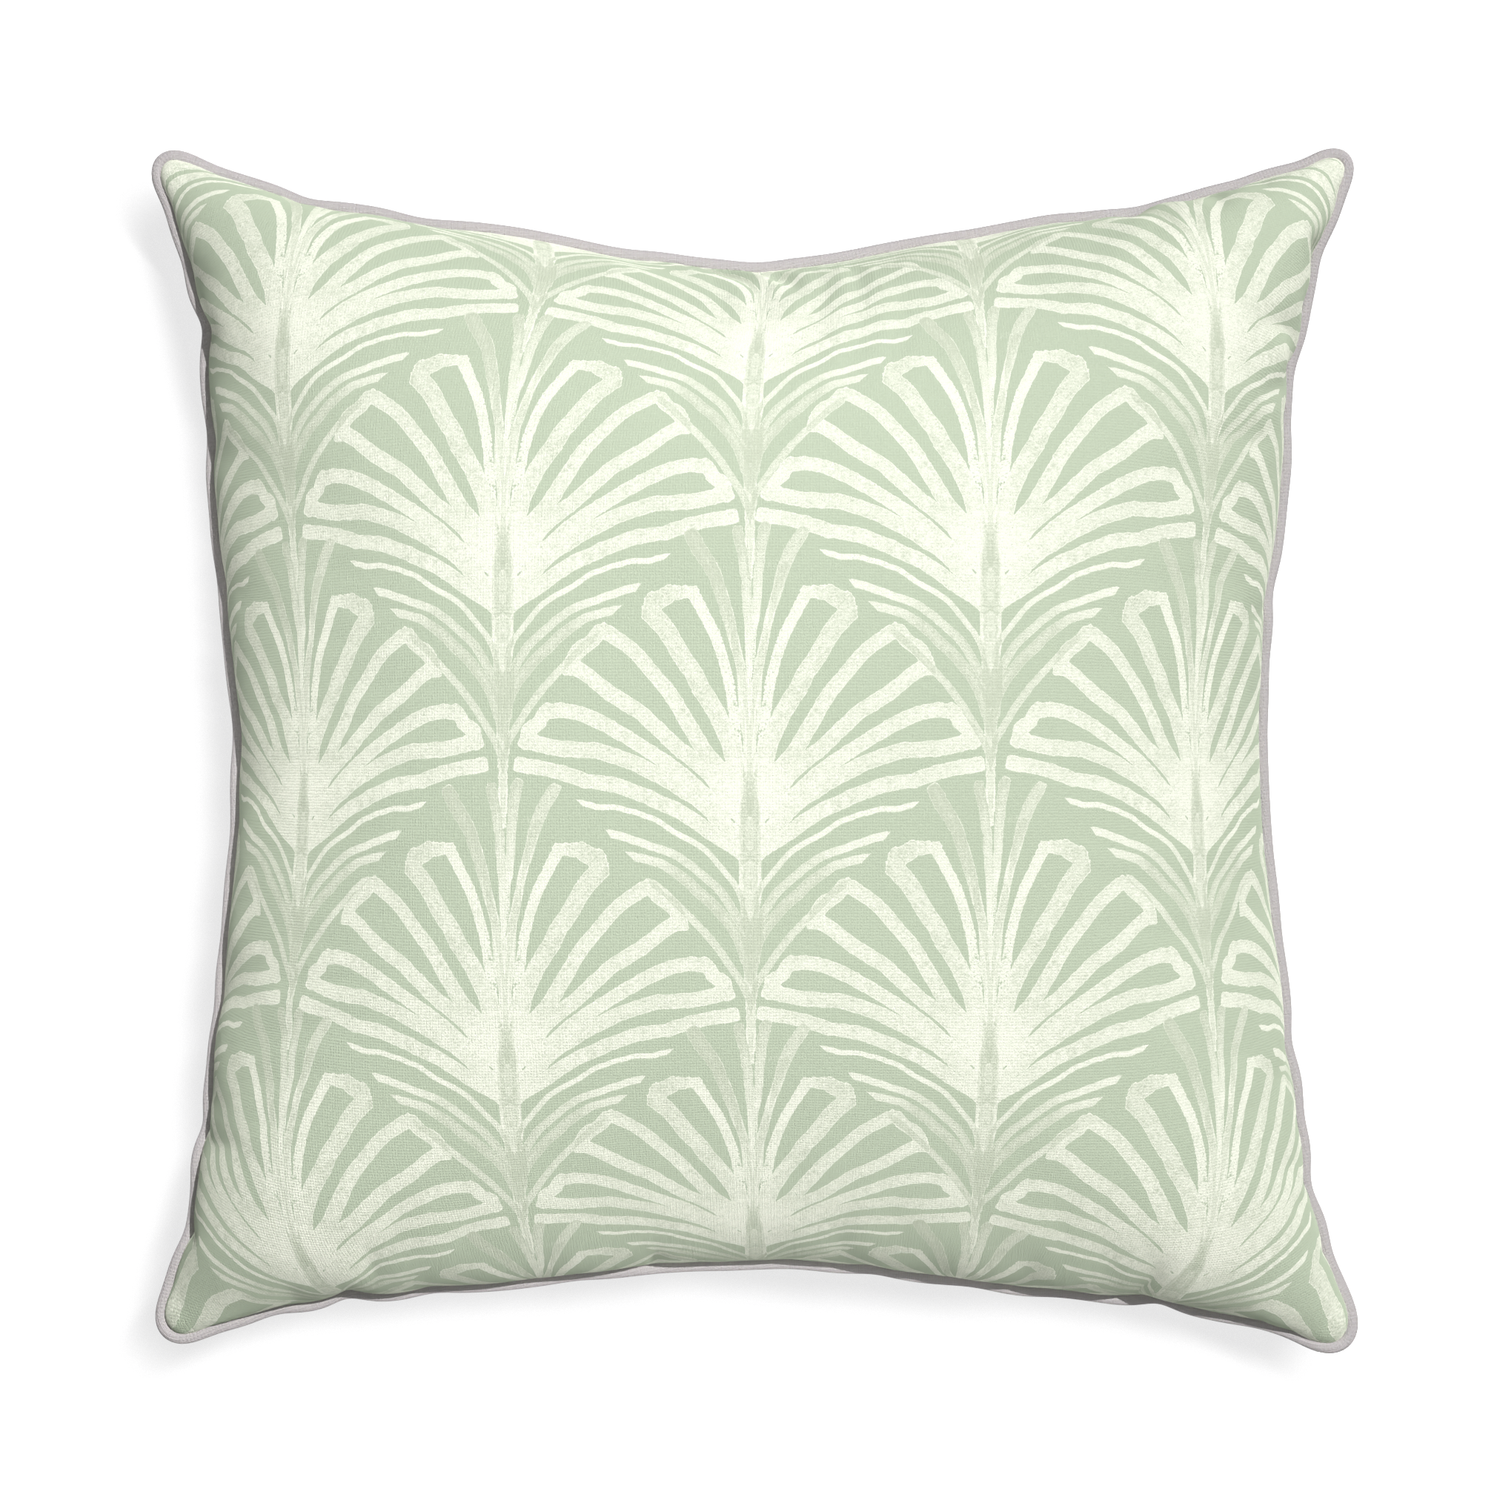 Euro-sham suzy sage custom sage green palmpillow with pebble piping on white background